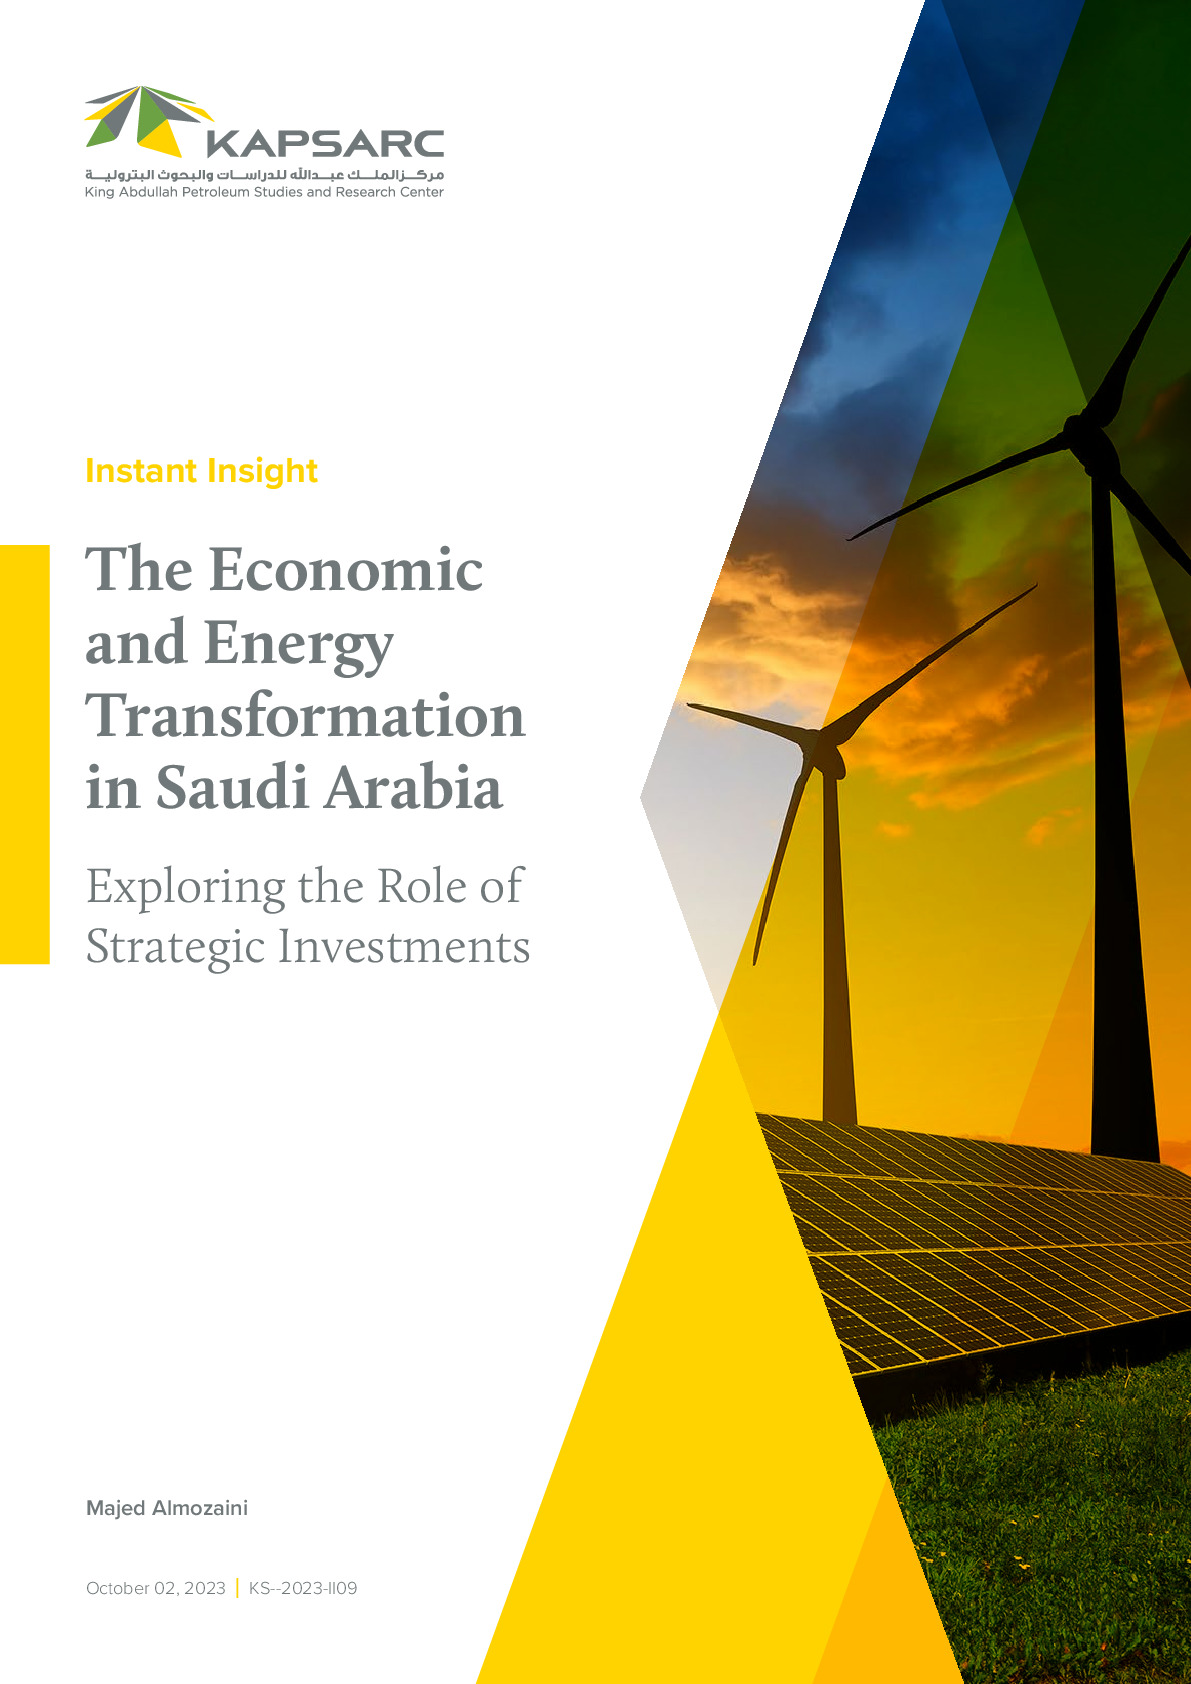 The Economic and Energy Transformation in Saudi Arabia: Exploring the Role of Strategic Investments